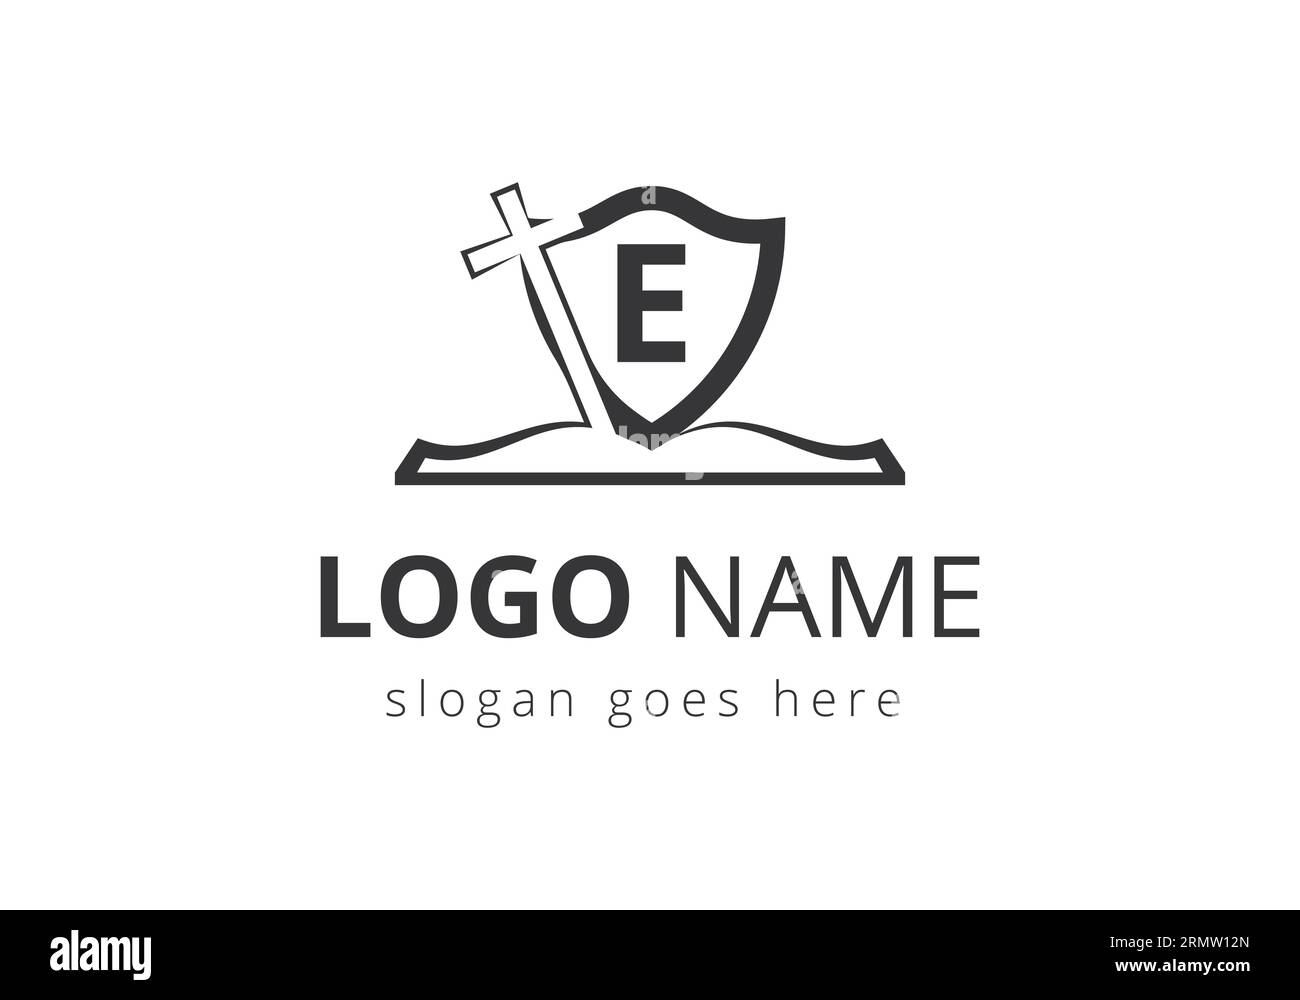 Church logo With E Letter Concept. Christian sign symbols. The cross of Jesus logo for christian church Stock Vector